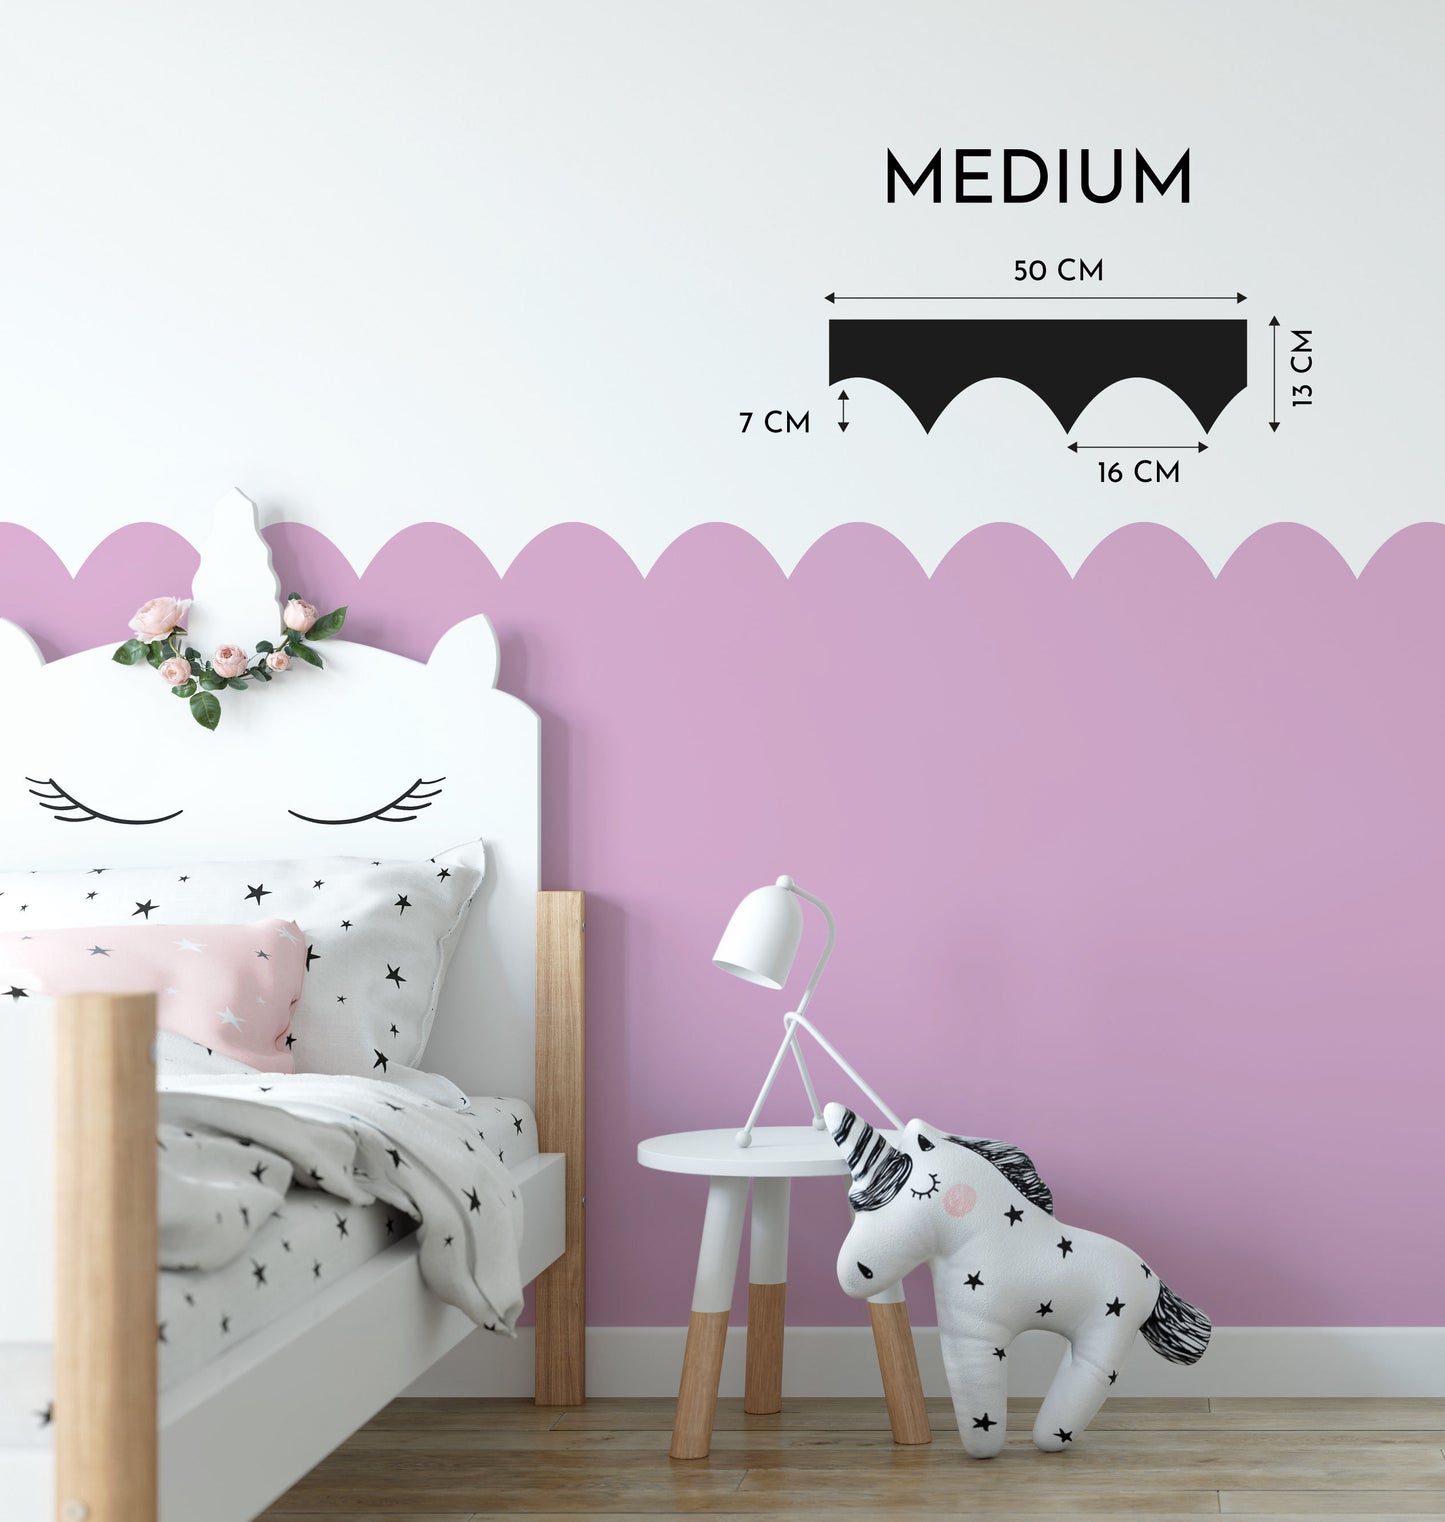 Wall Boarder Painting Stencils For Walls Edging Removable Vinyl Wall Decal | Nursery Room Children's Stencils For Painting